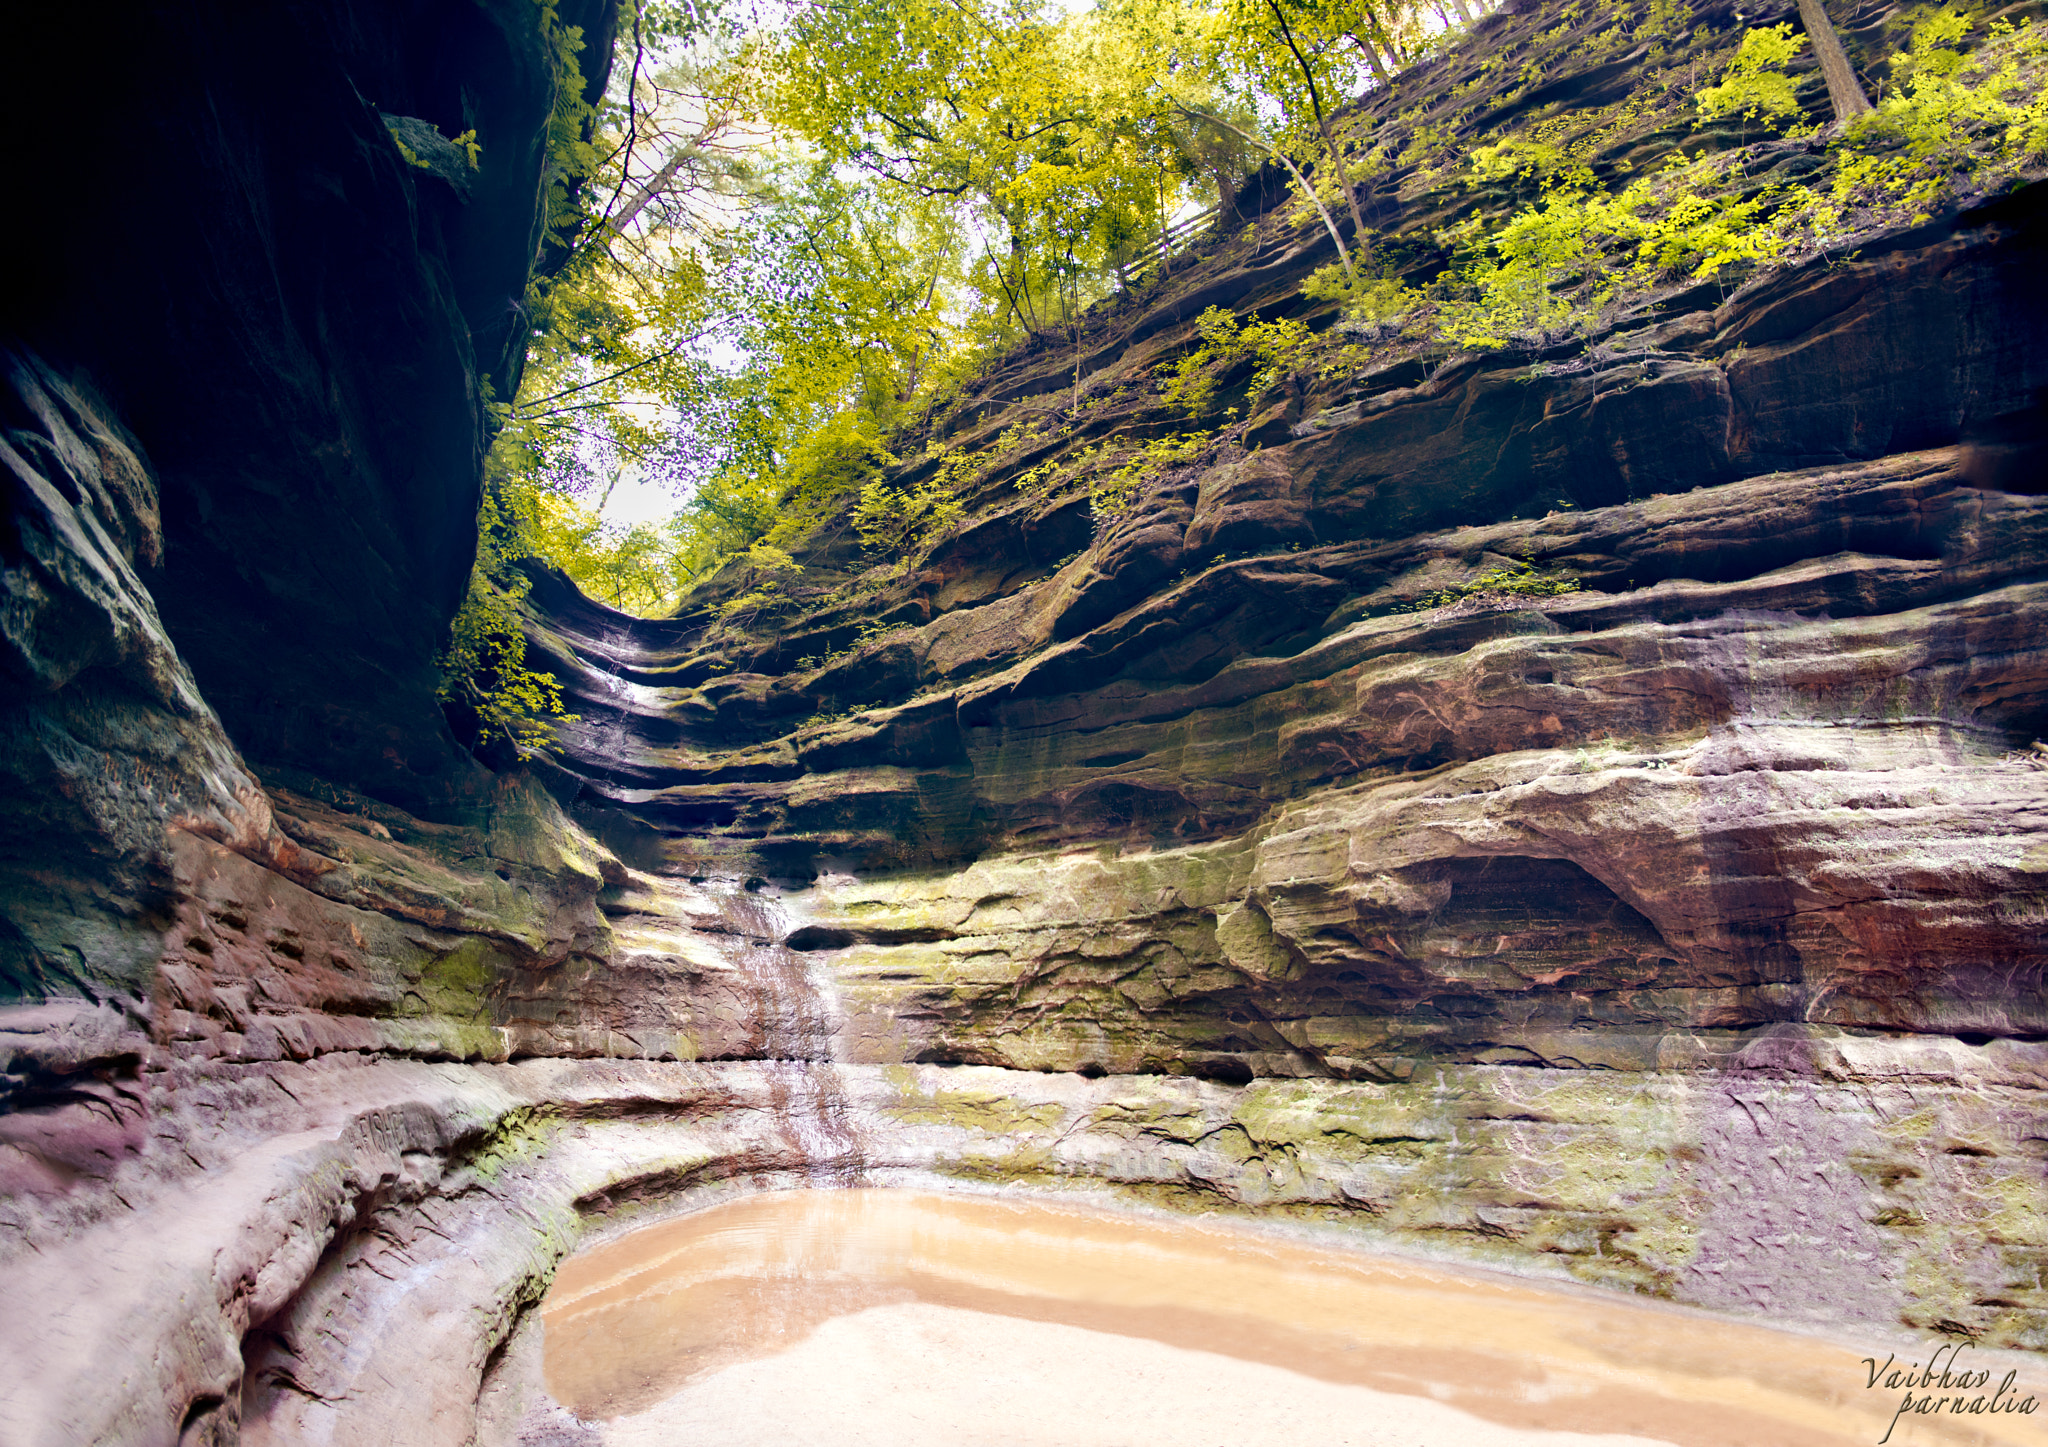 .64x Metabones 18-35/1.8 sample photo. Starved rock photography